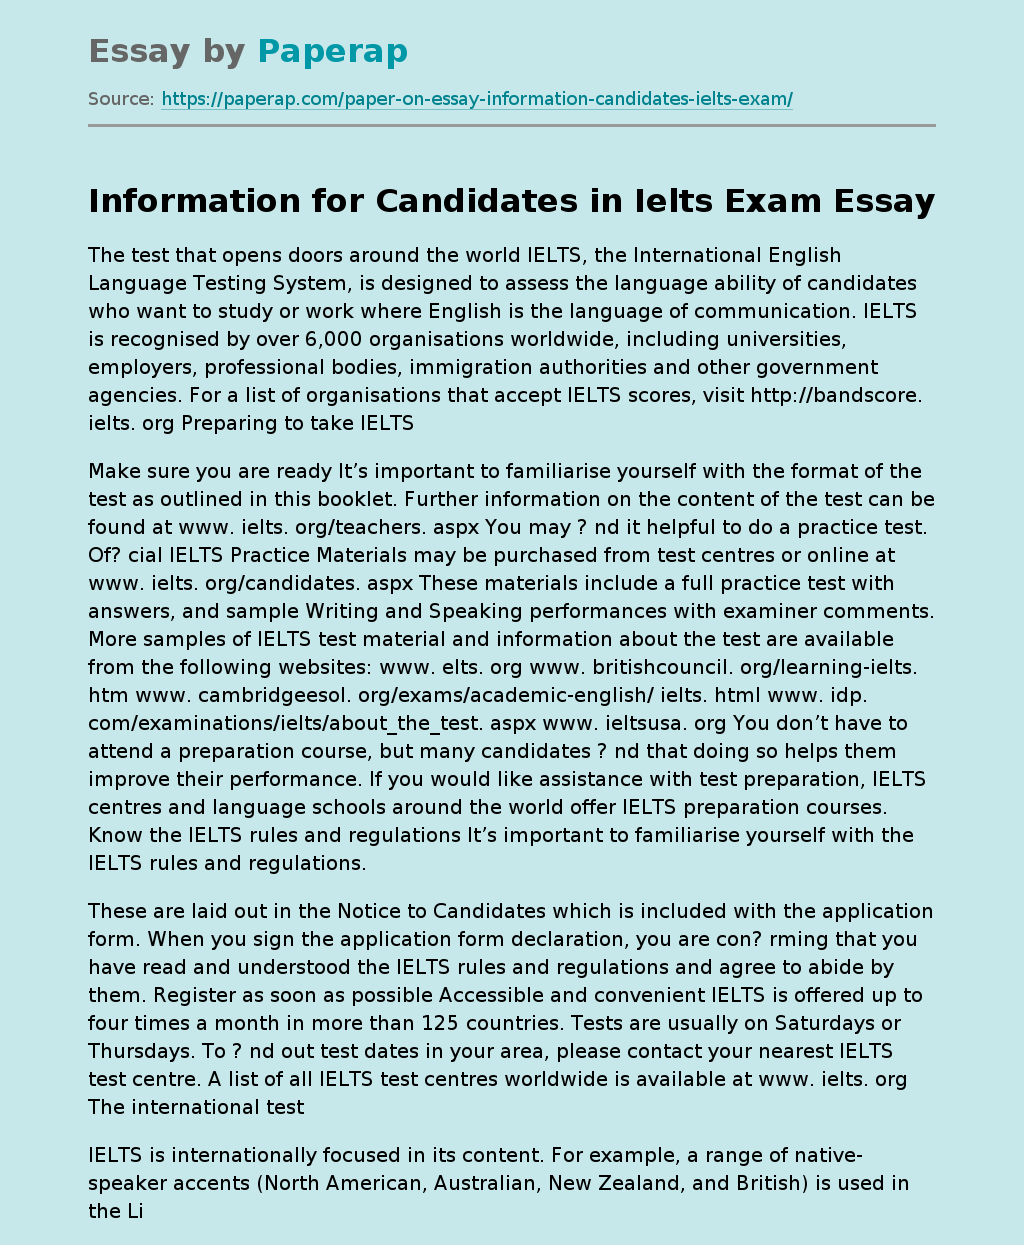 Information for Candidates in Ielts Exam